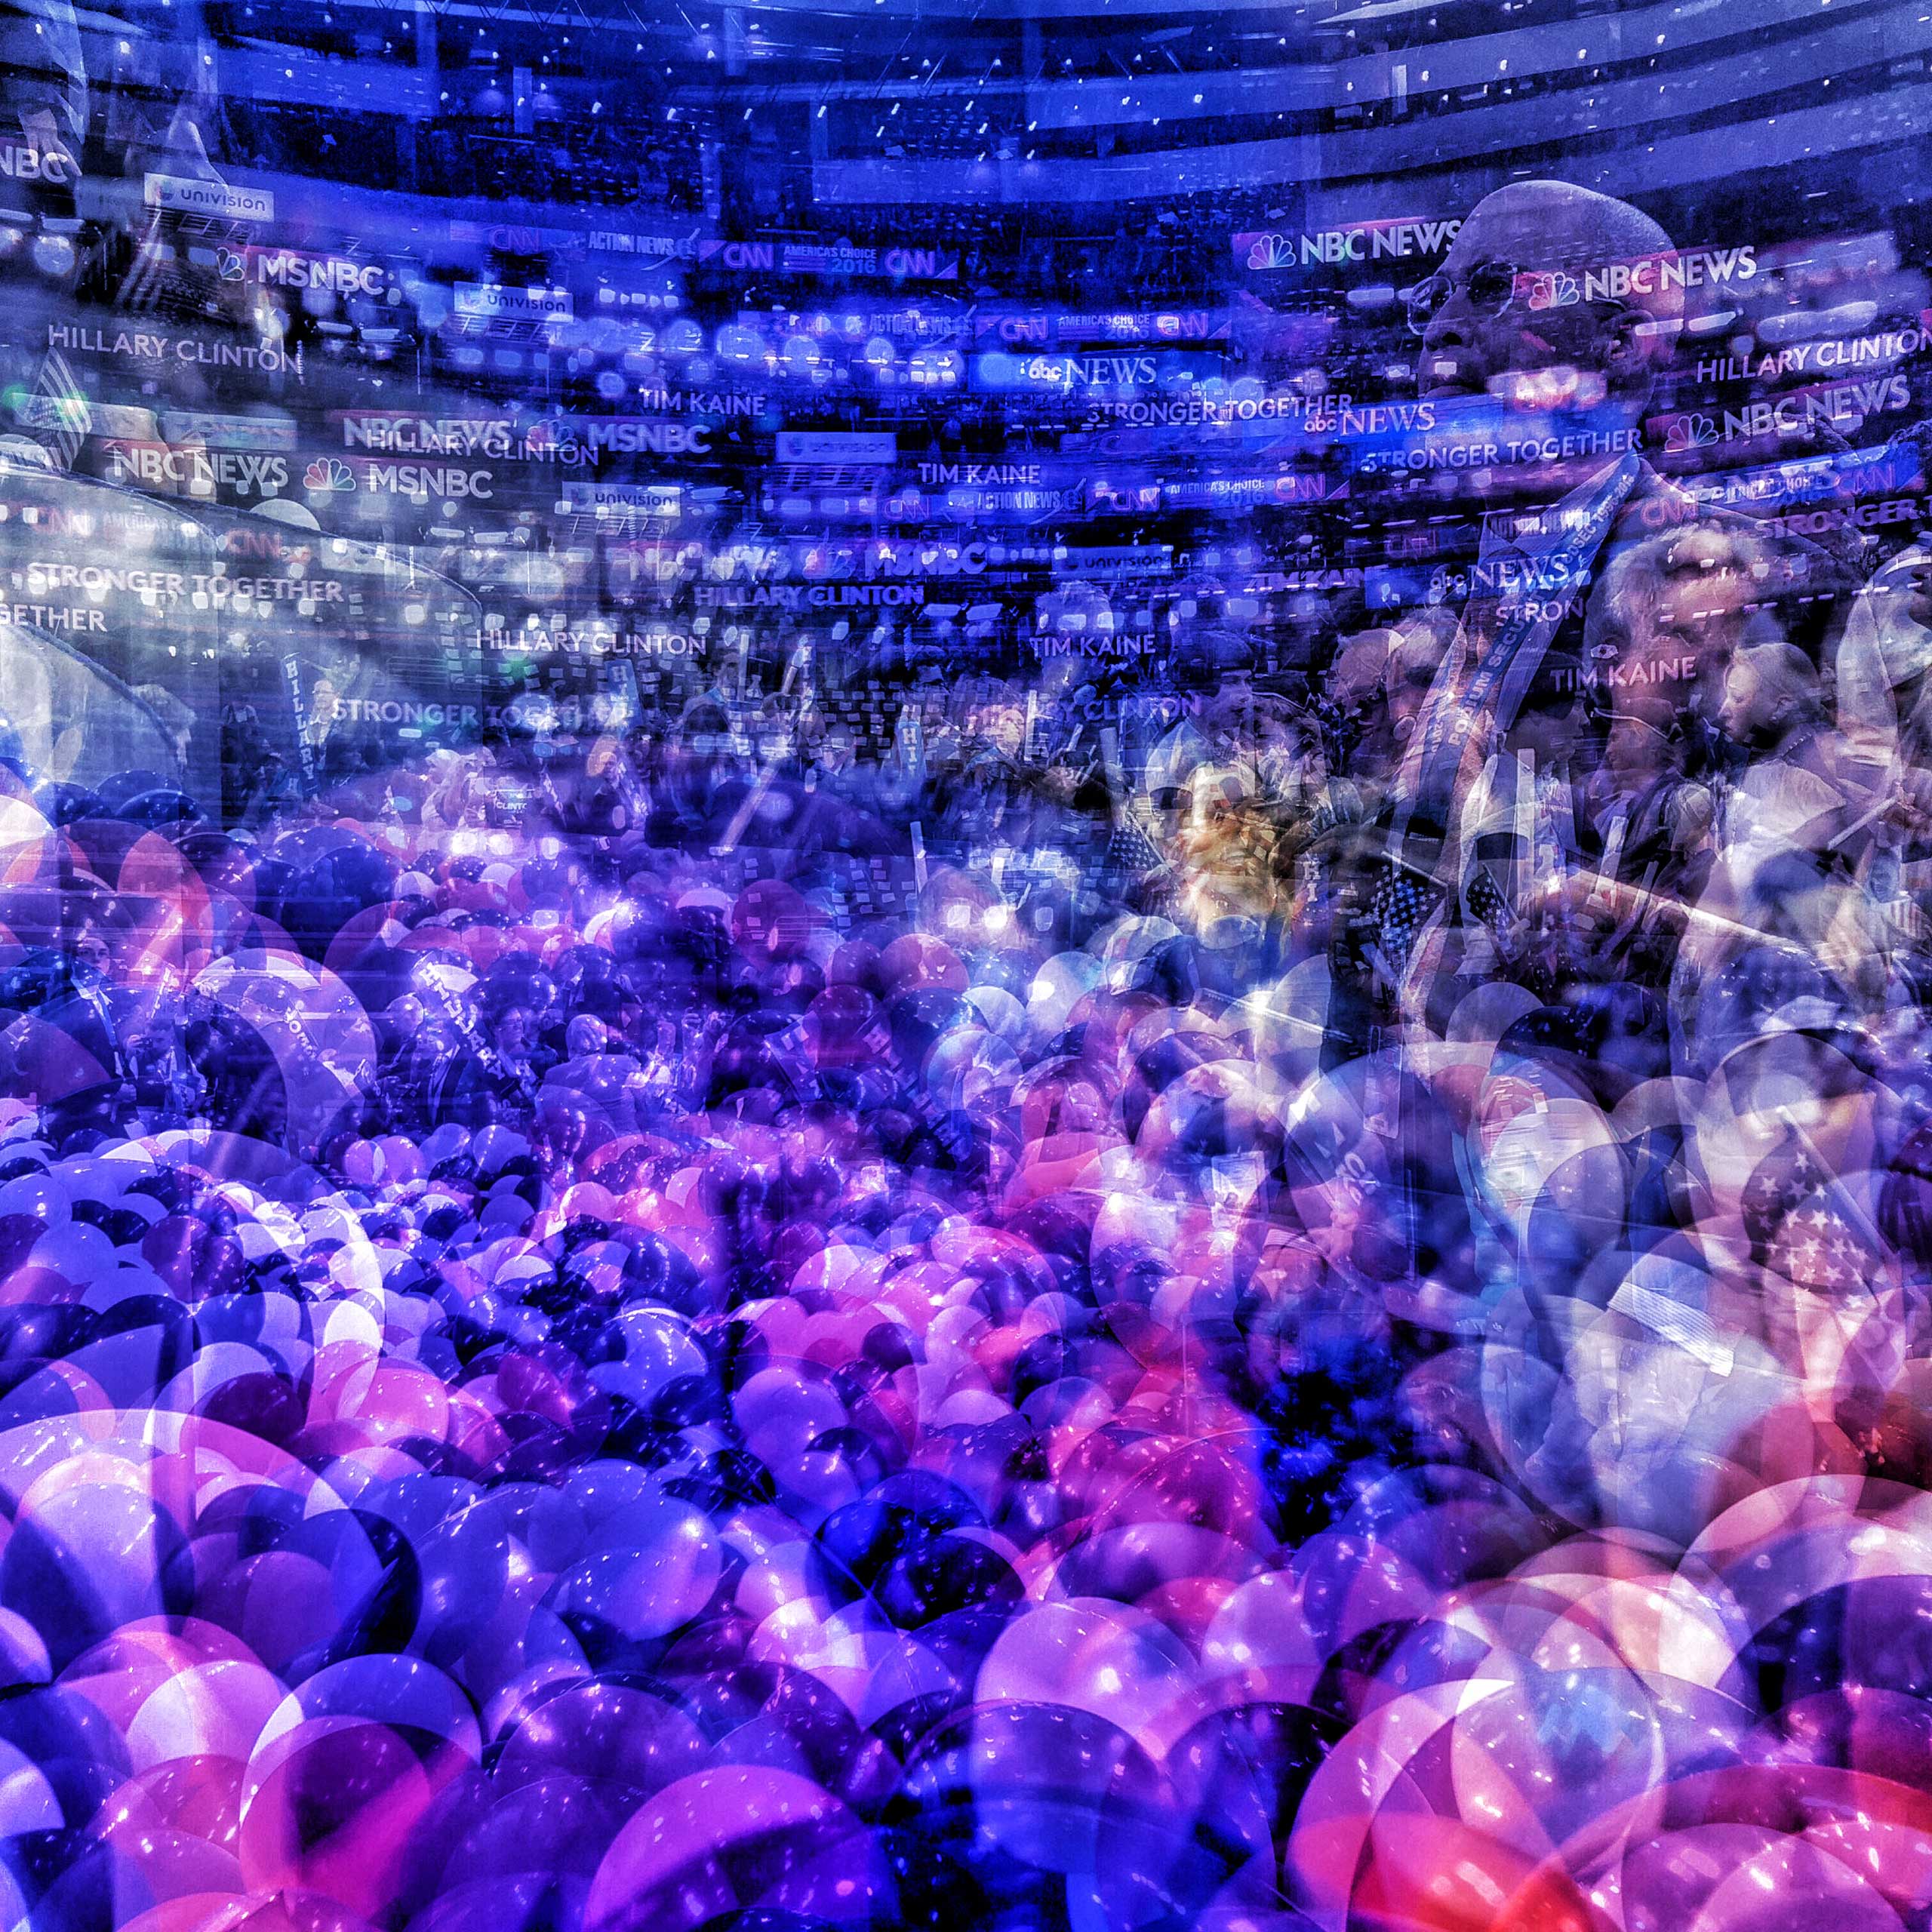 This multiple-exposure photograph captures the floor of the Democratic National Convention at the Wells Fargo Center in Philadelphia after a balloon drop that marked Hillary Clinton's nomination on July 28, 2016.